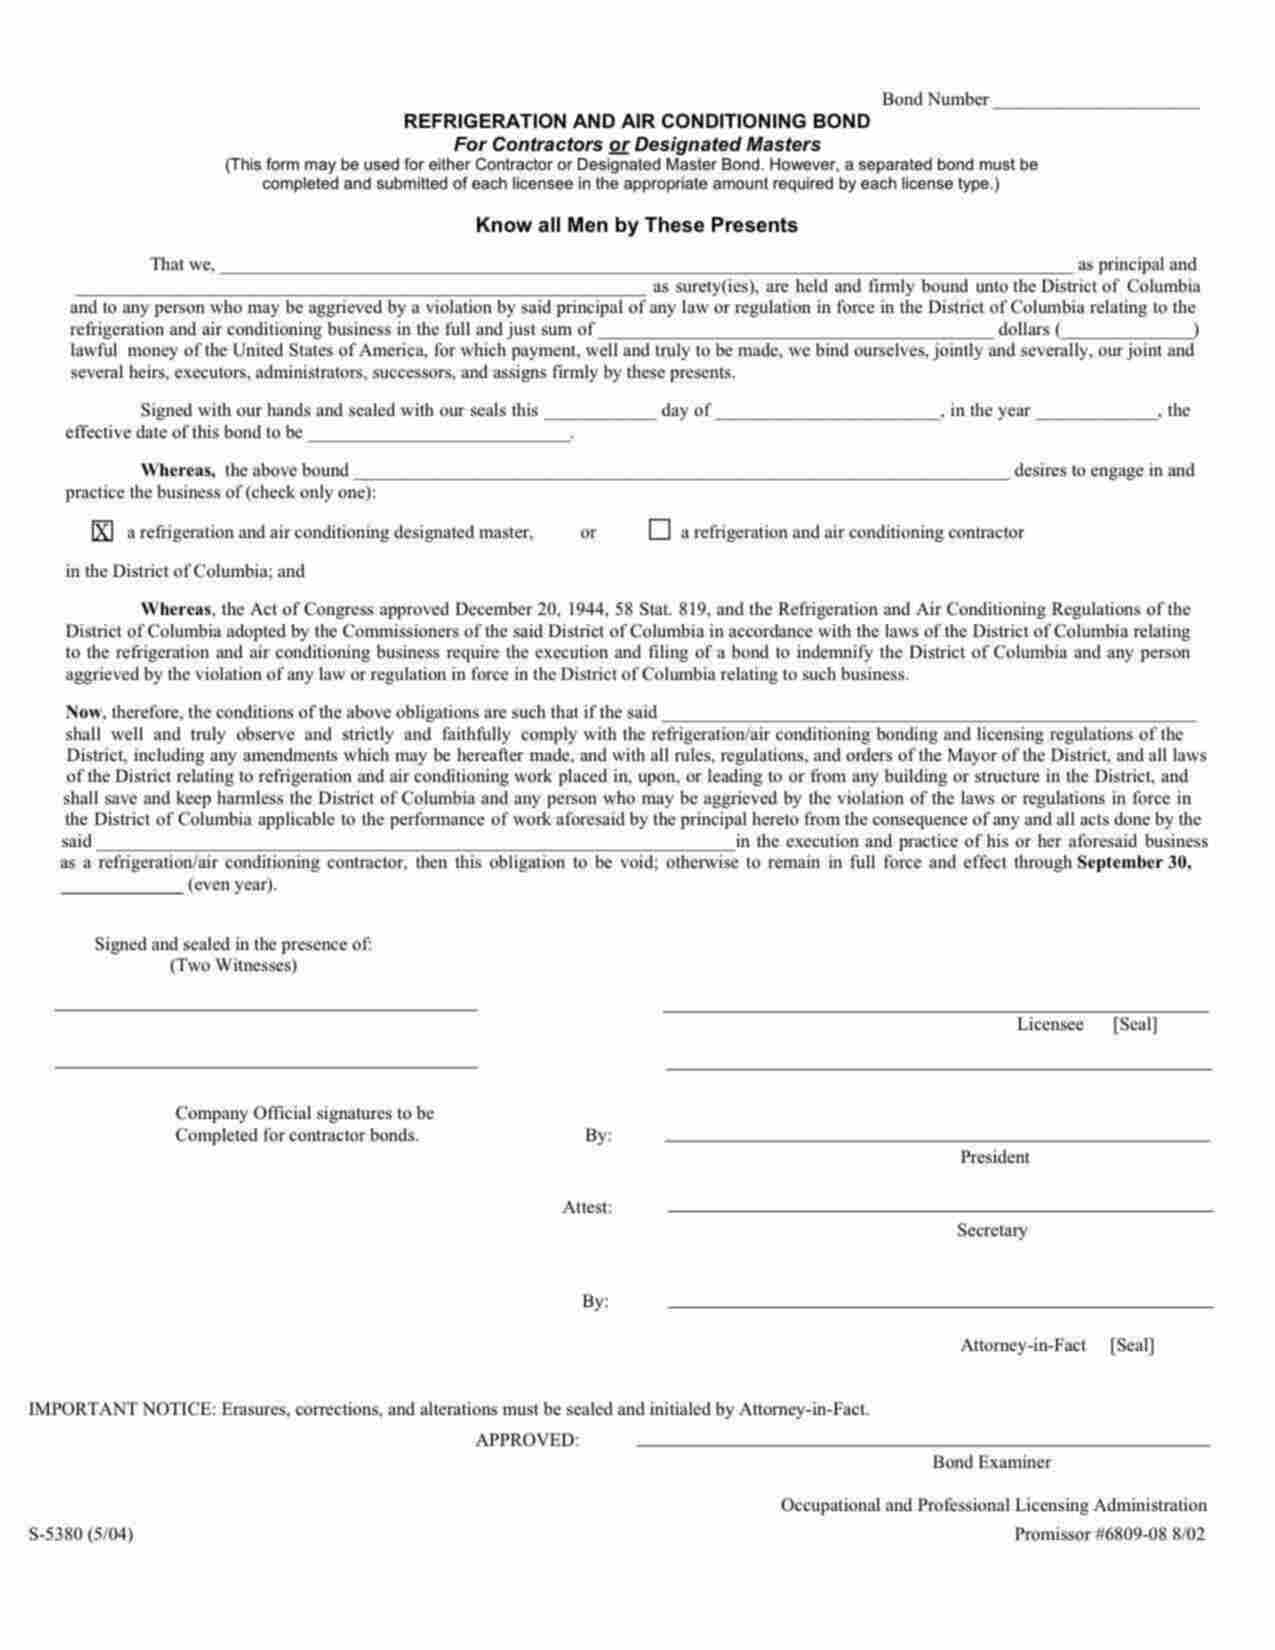 District of Columbia Refrigeration and Air Conditioning Designated Master Bond Form